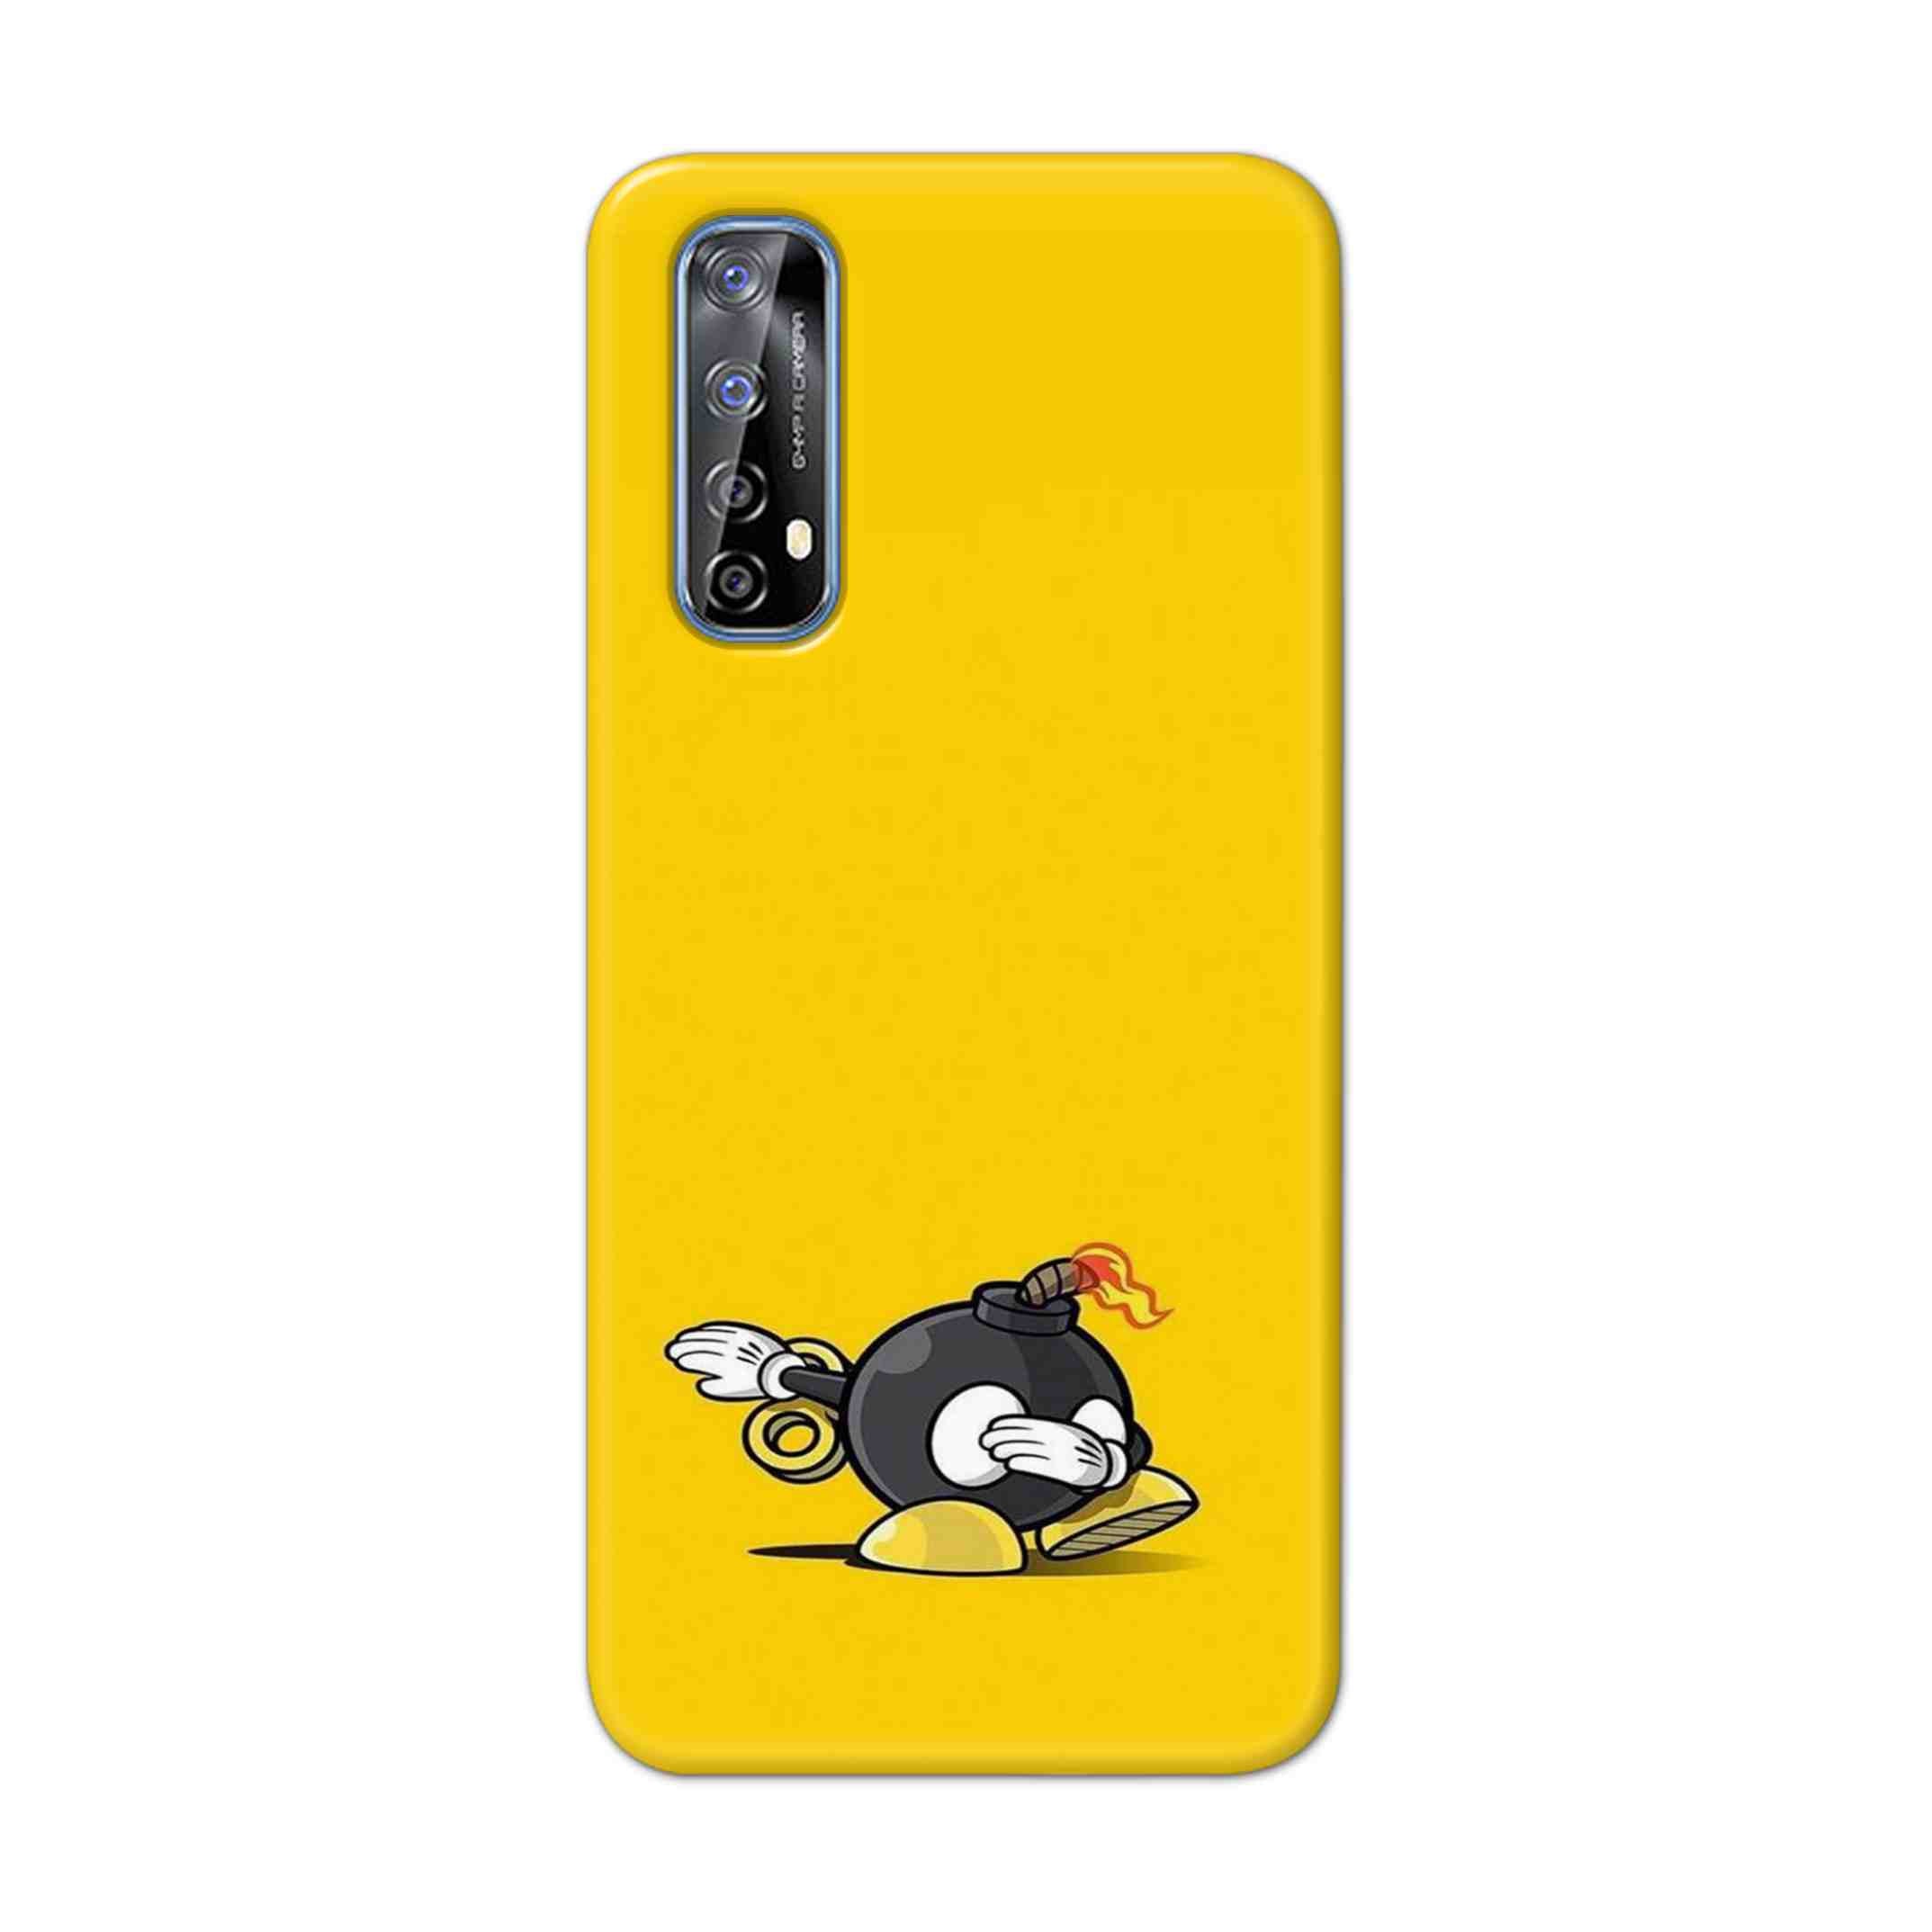 Buy Dashing Bomb Hard Back Mobile Phone Case Cover For Realme 7 Online